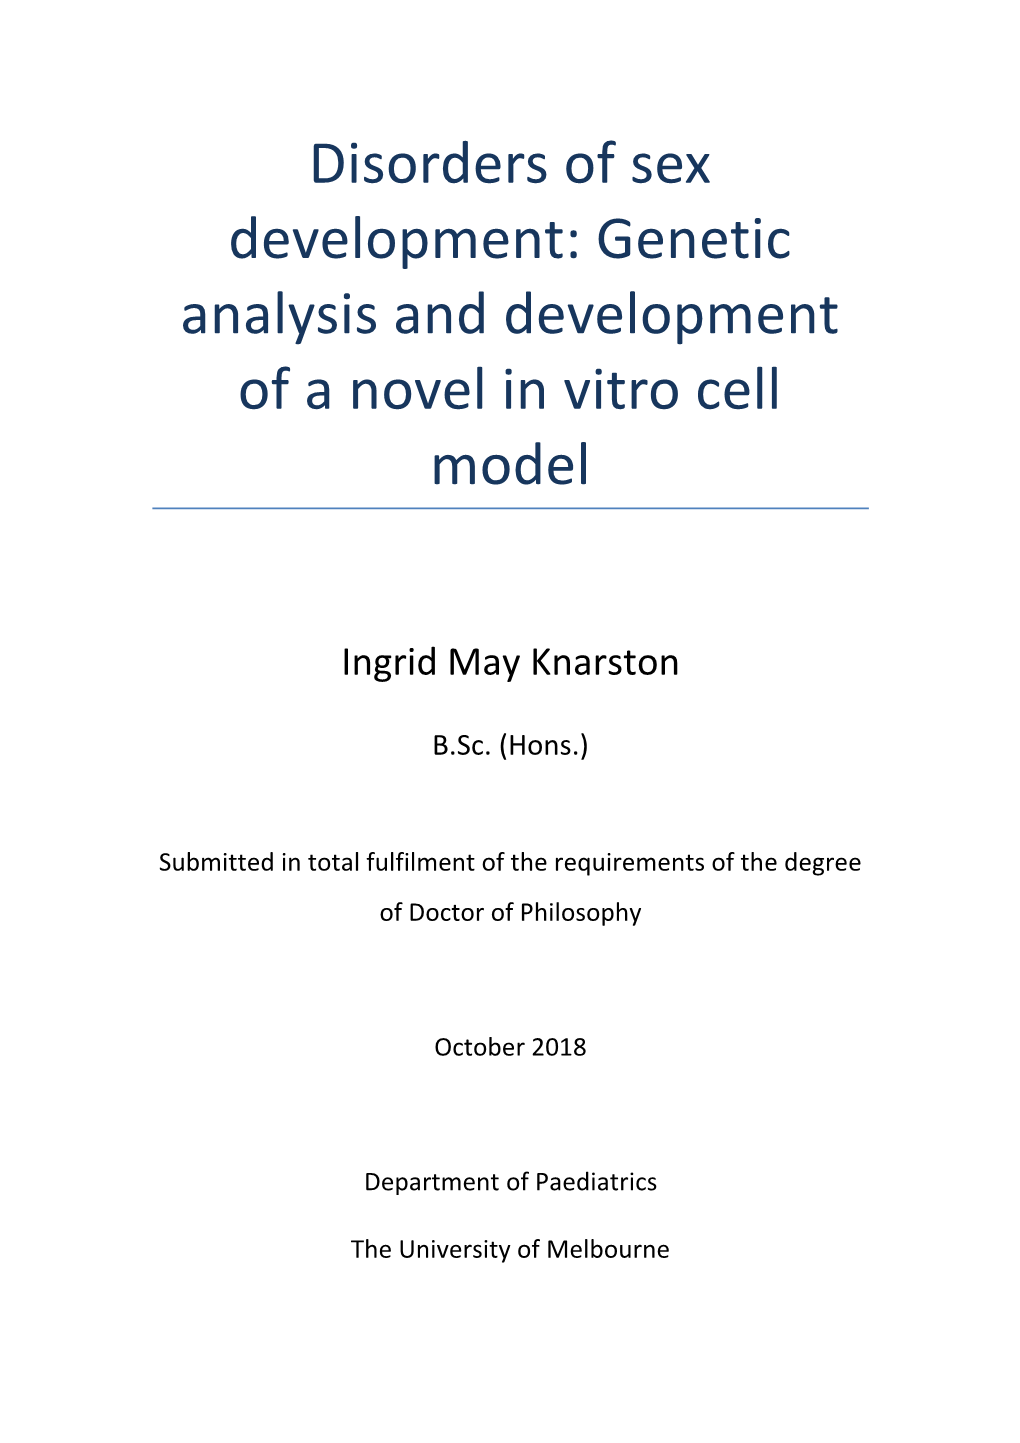 Genetic Analysis and Development of a Novel in Vitro Cell Model